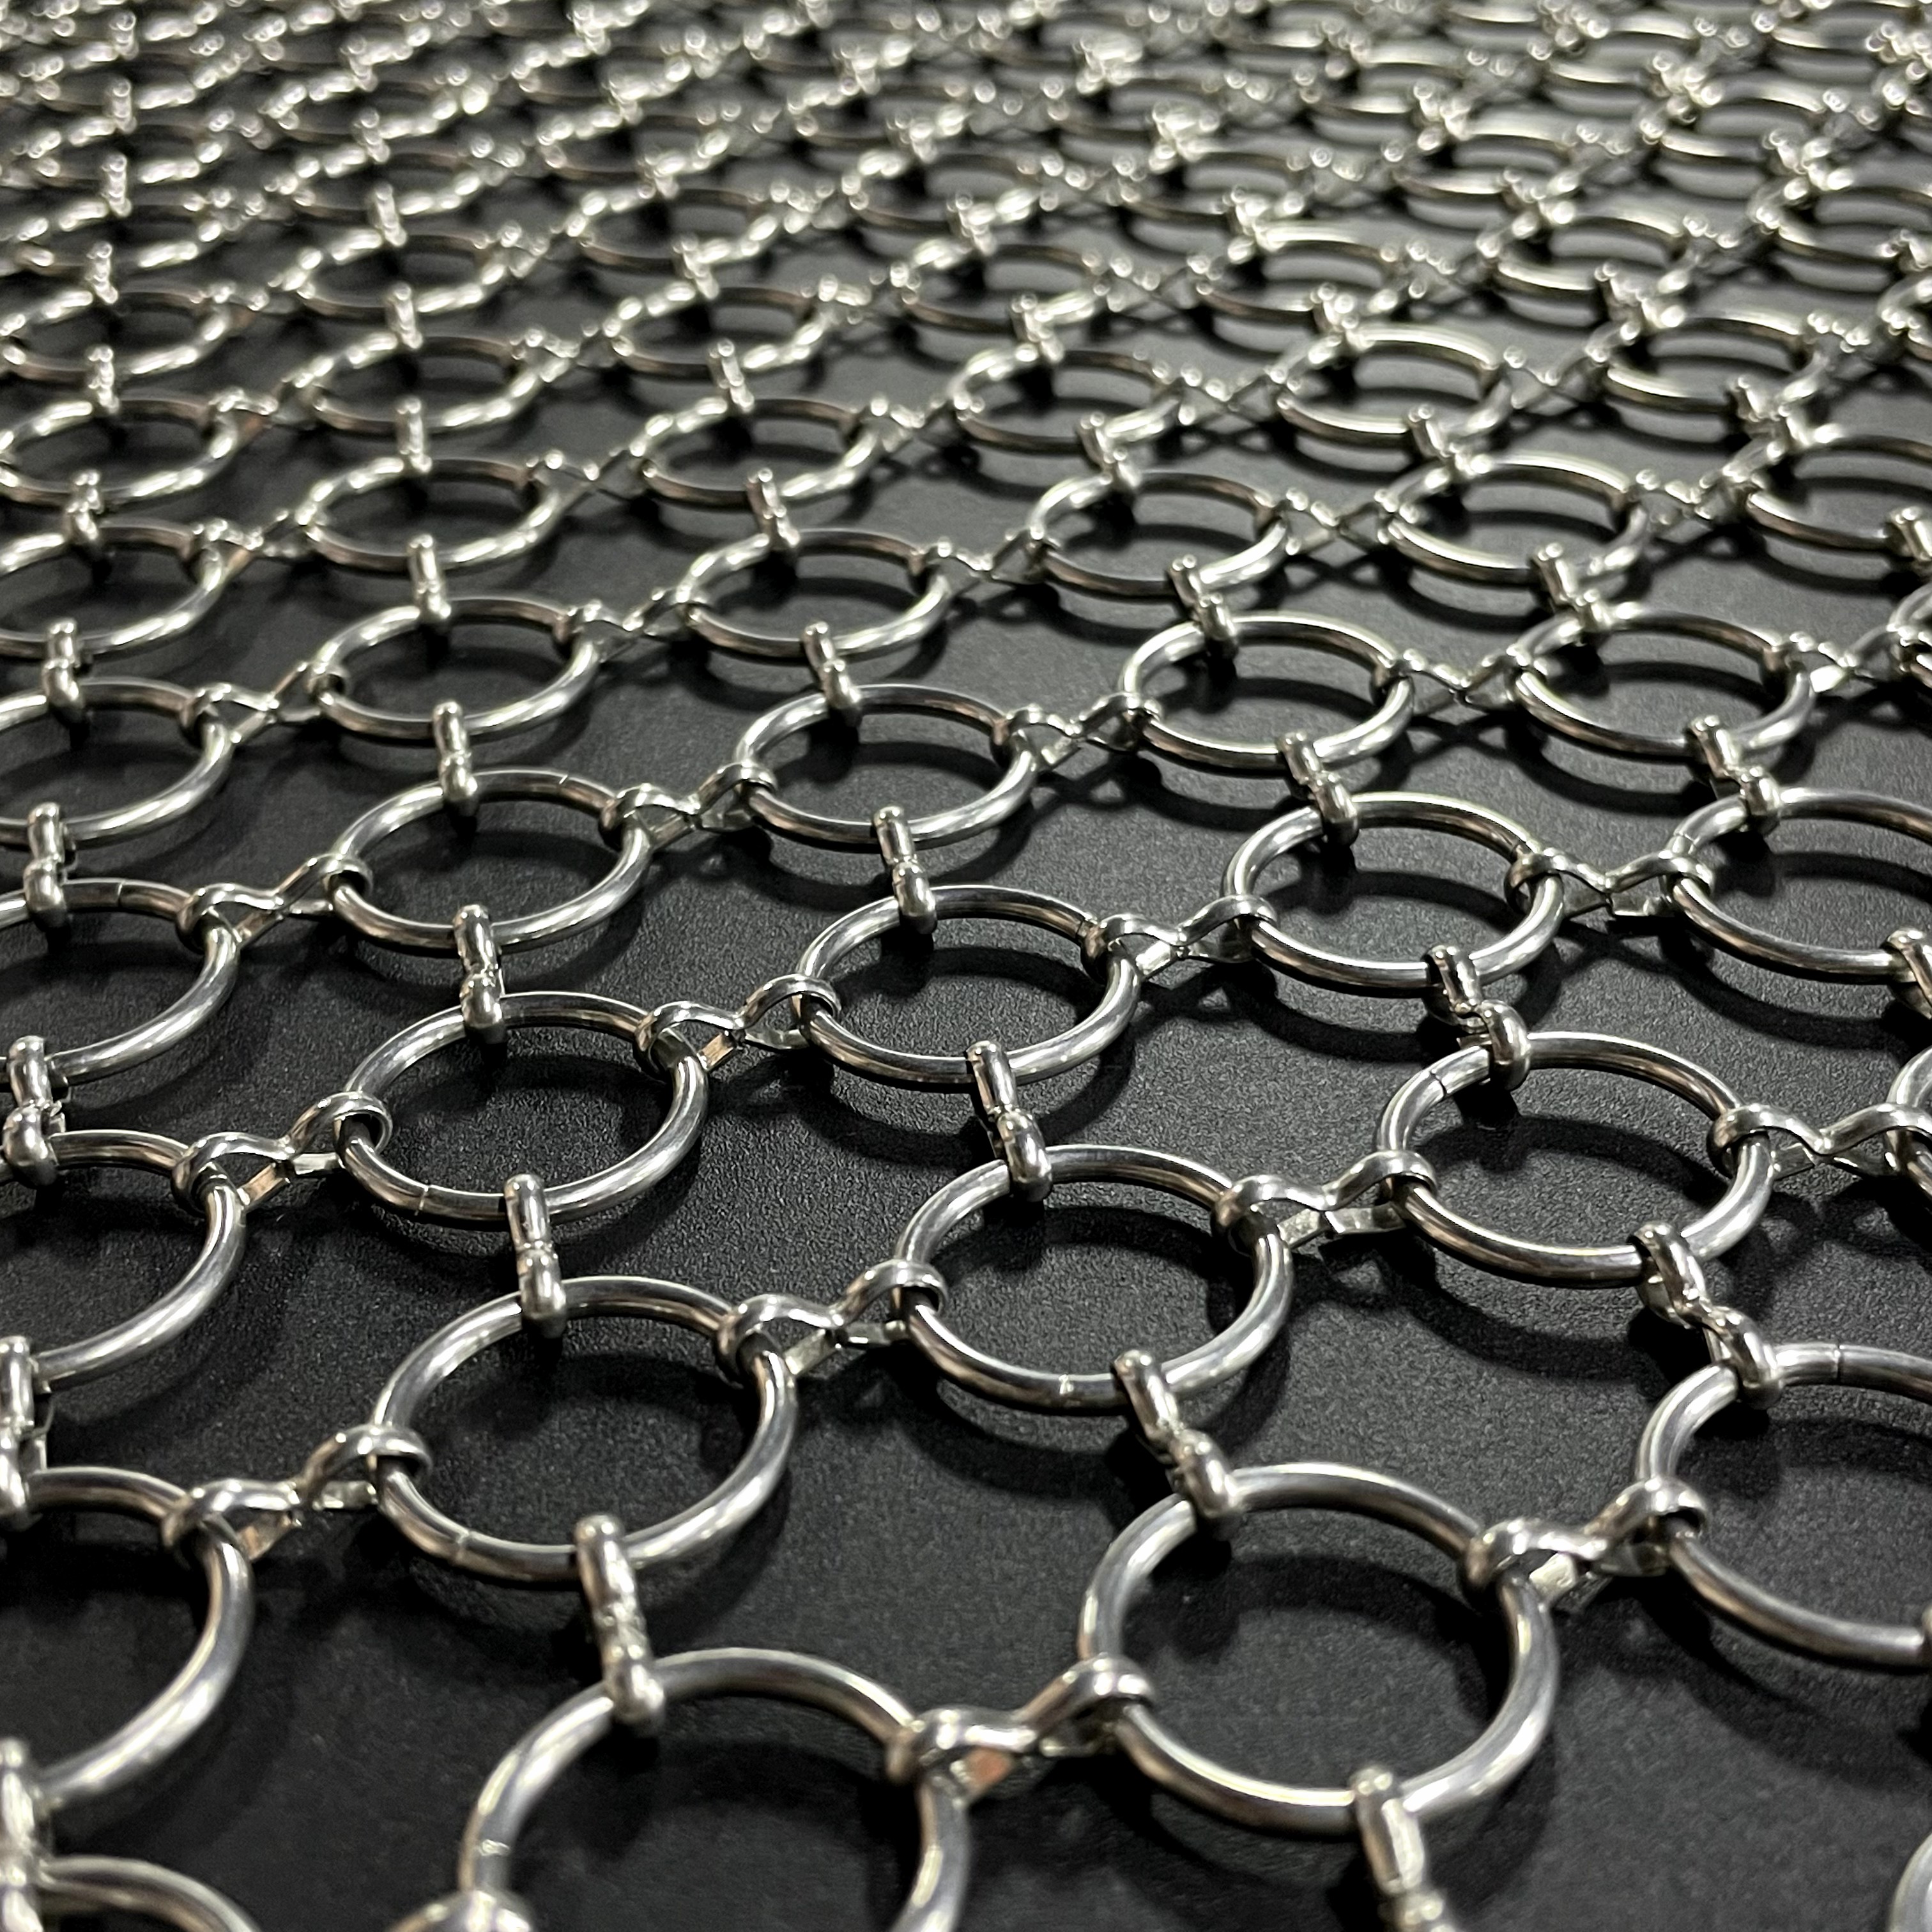 China Wholesale Price Metal Ring Mesh Factory—Anping Dongjie Wire Mesh Company